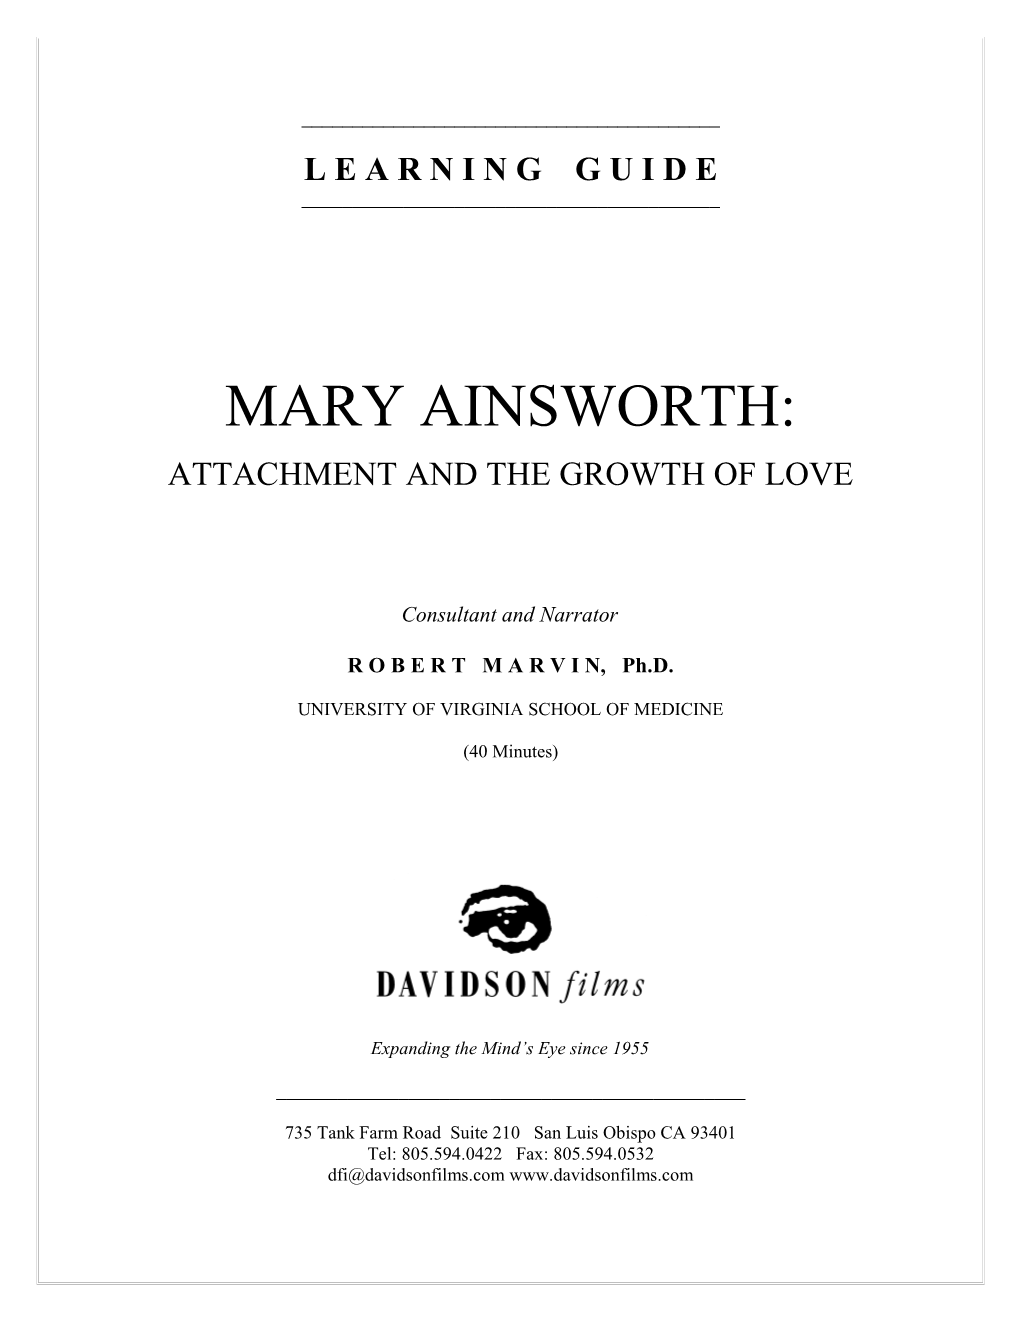 Attachment and the Growth of Love